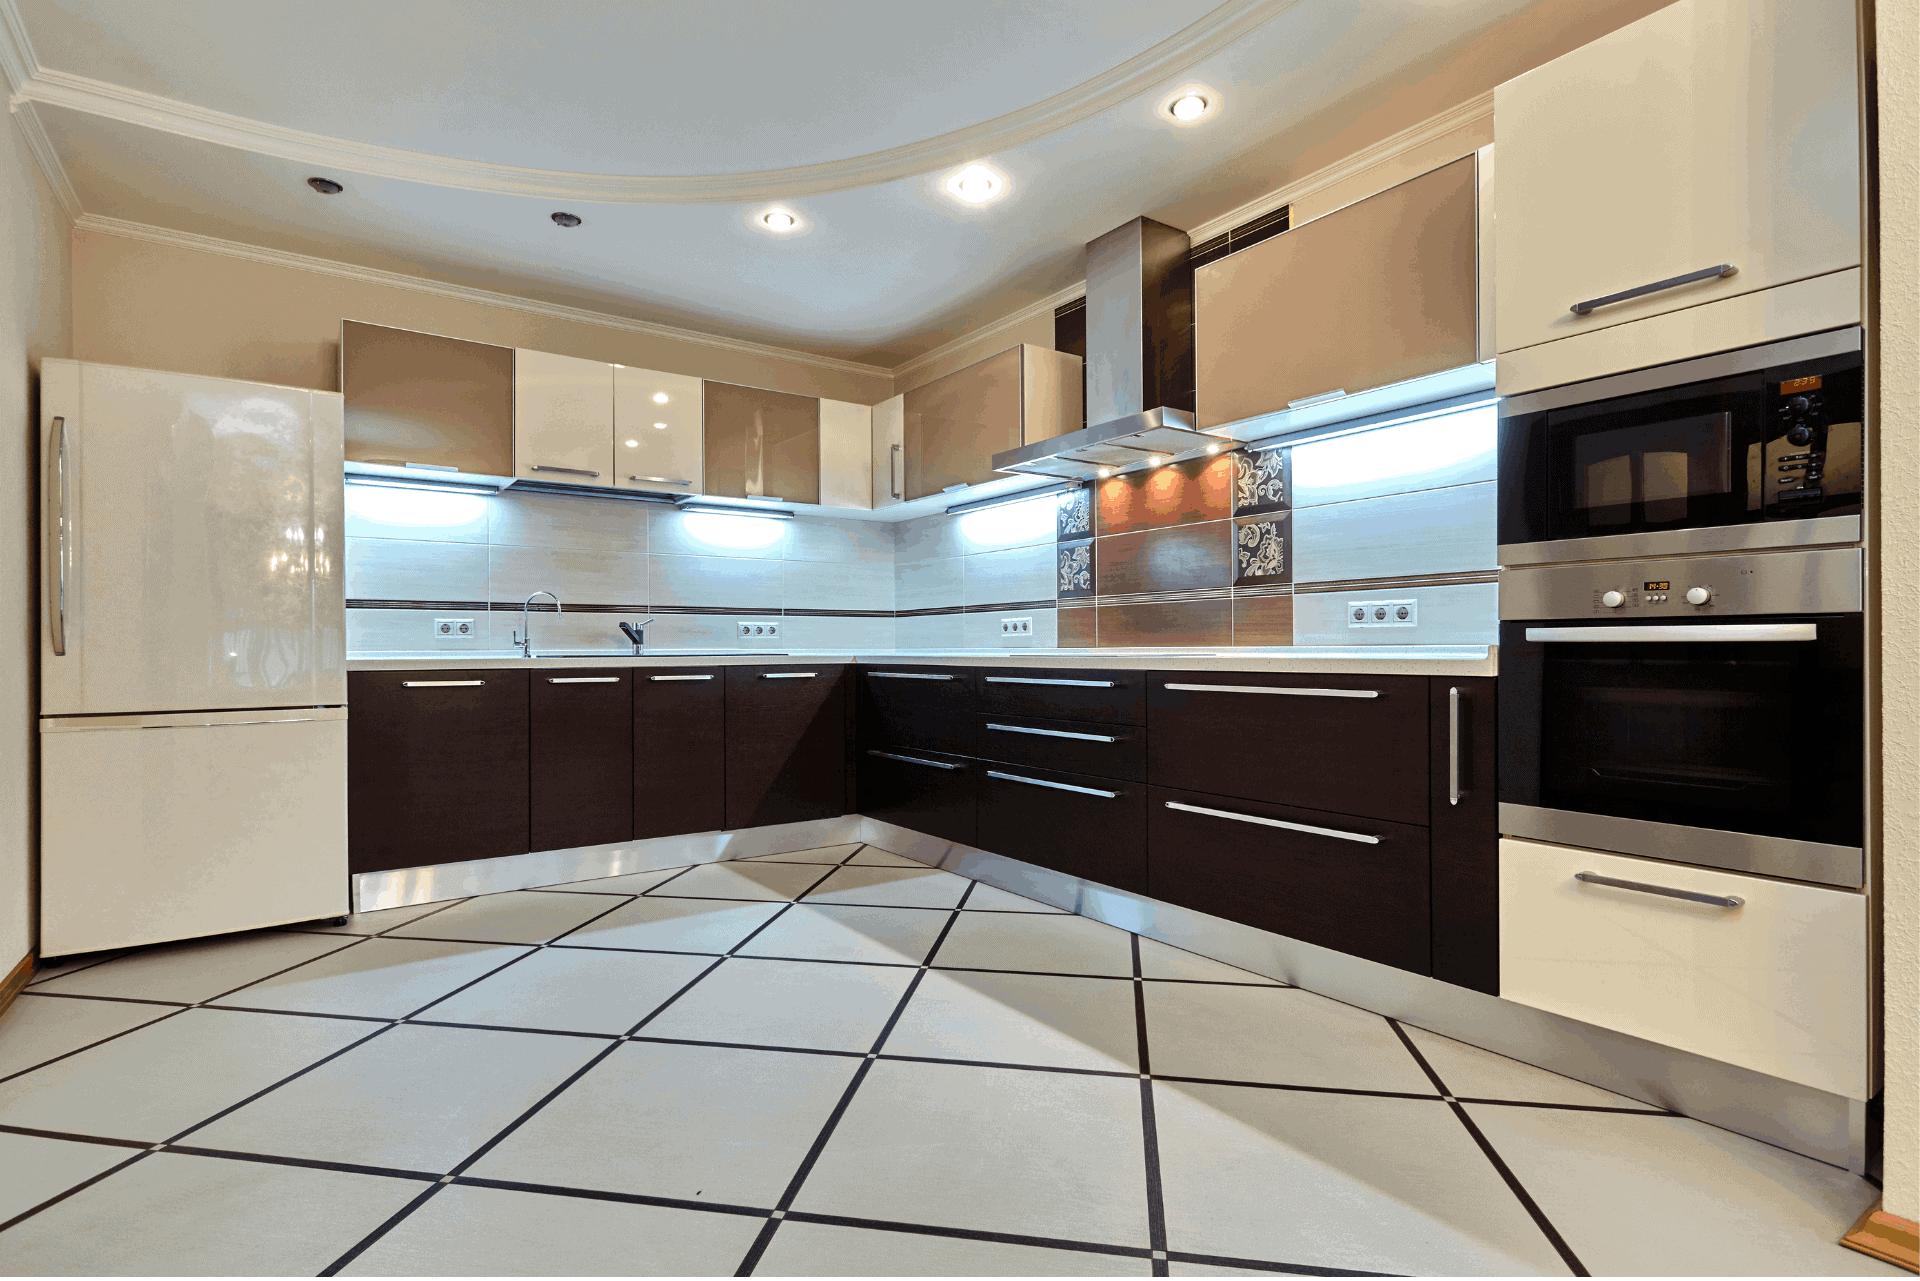 Important Aspects To Consider While Designing The Kitchen Interiors